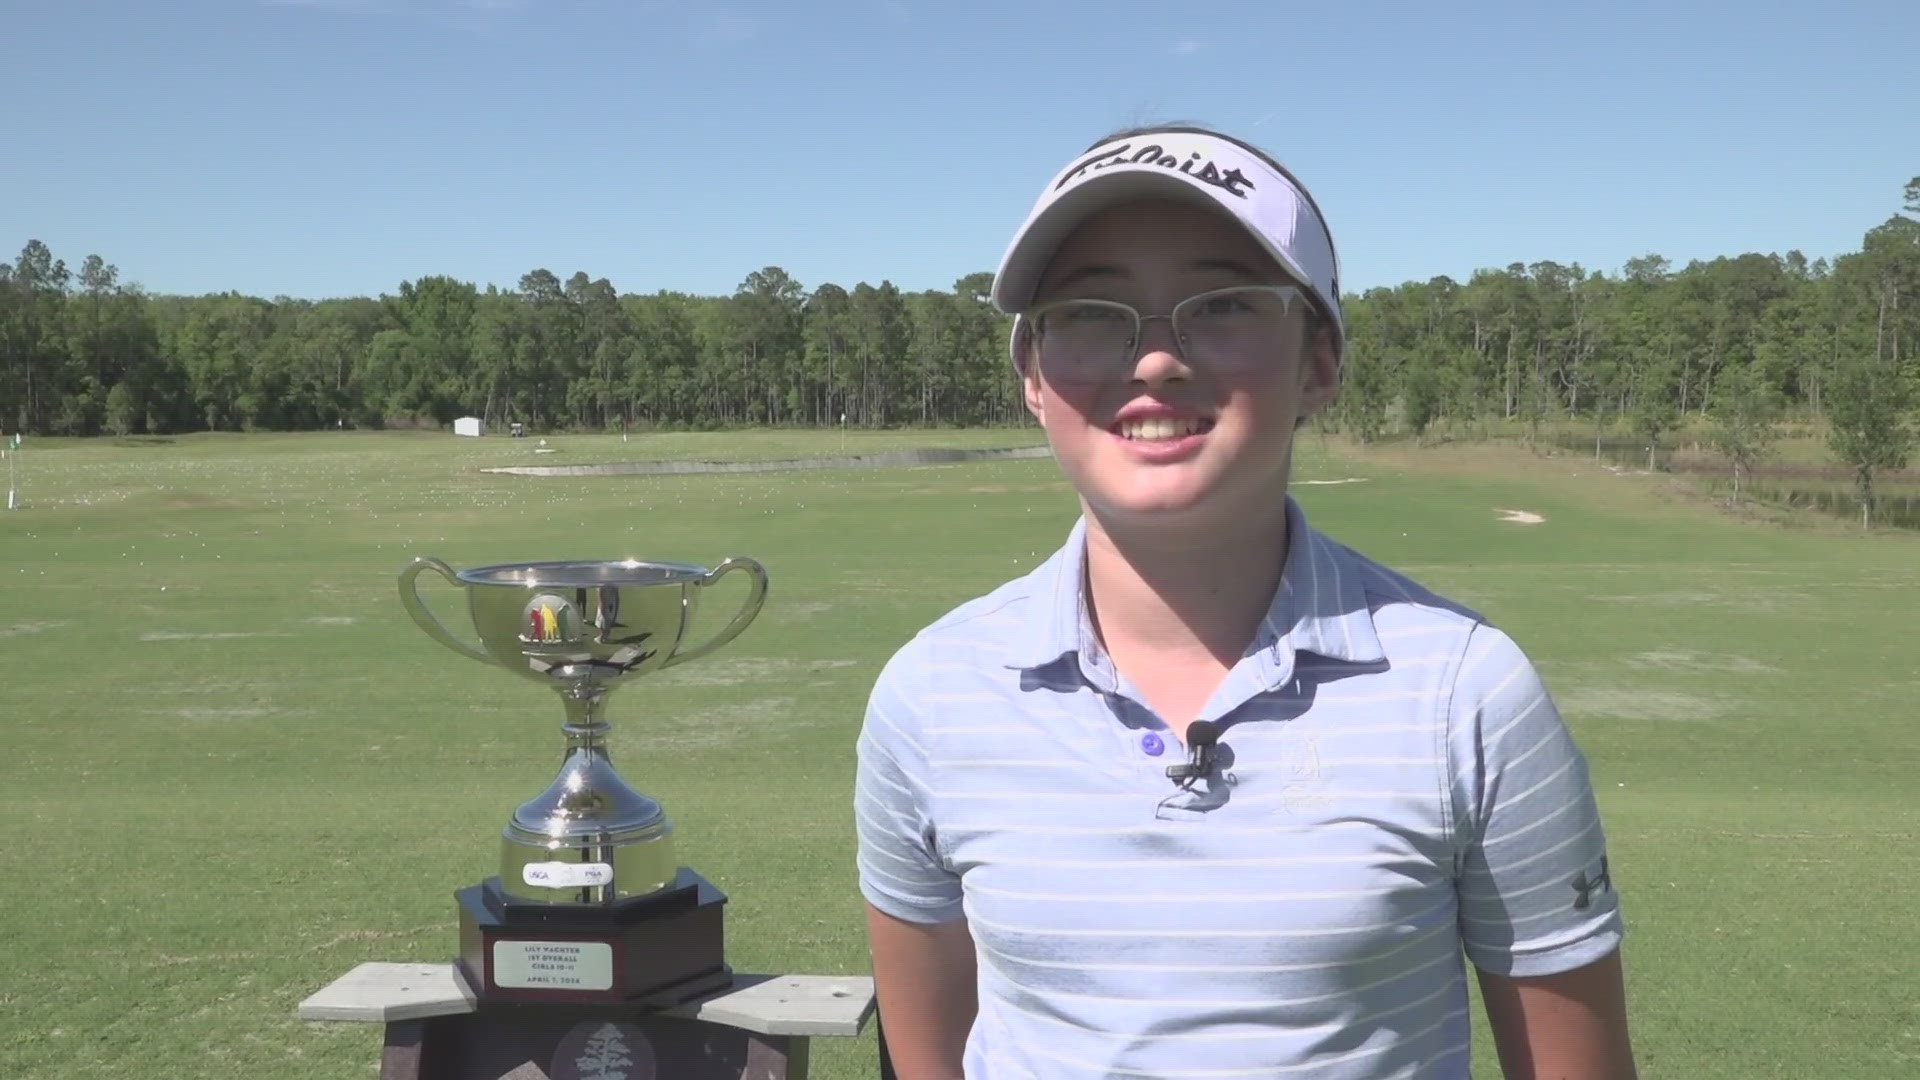 In 2023, Lily competed in the Chip, Drive and Putt tournament and placed 10th. That's when she decided to attend online school to allow more time for golf.